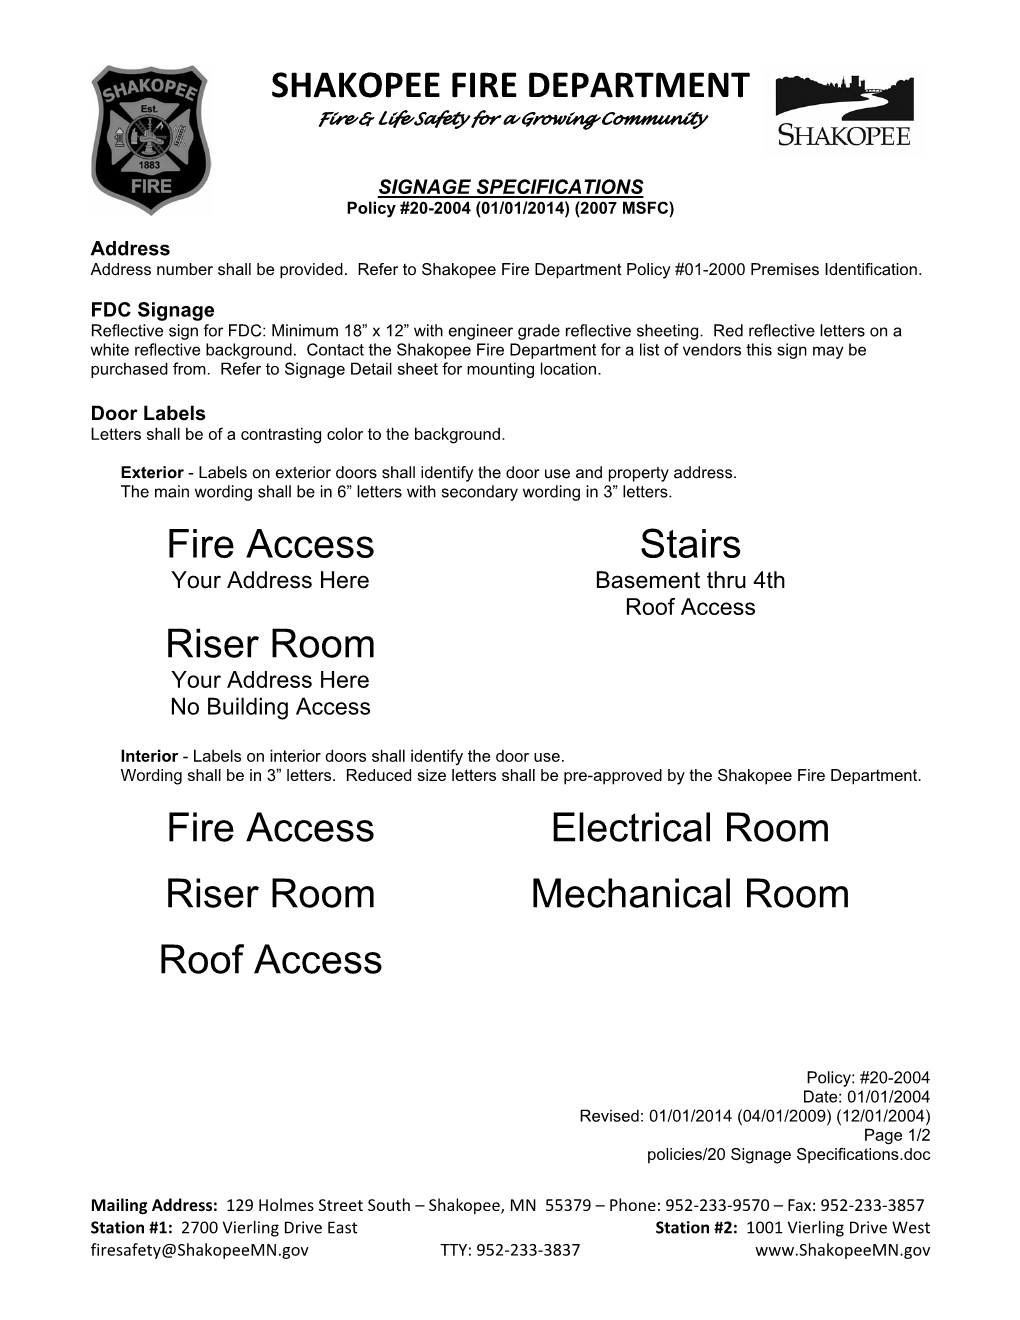 Fire Access Stairs Riser Room Fire Access Electrical Room Riser